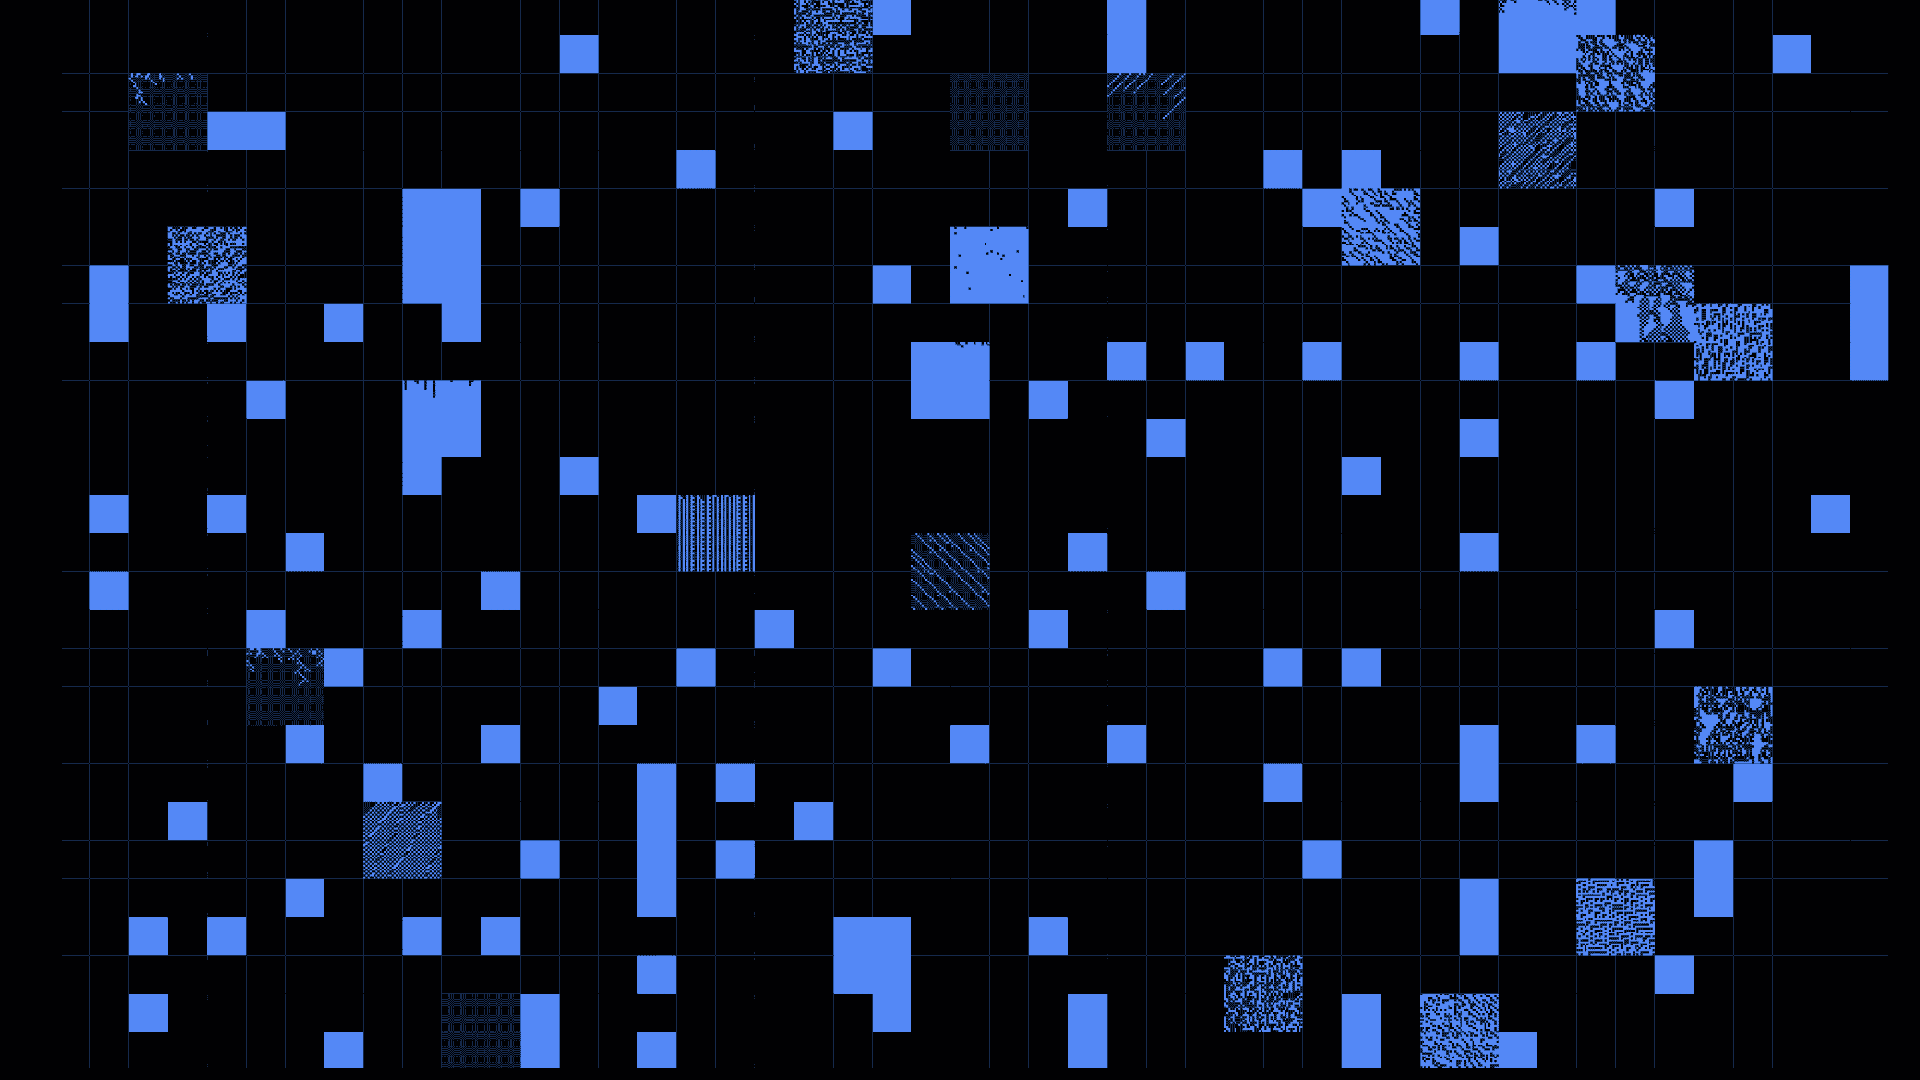 animated graphic of abstract blue and black patterns in pixelated square patterns